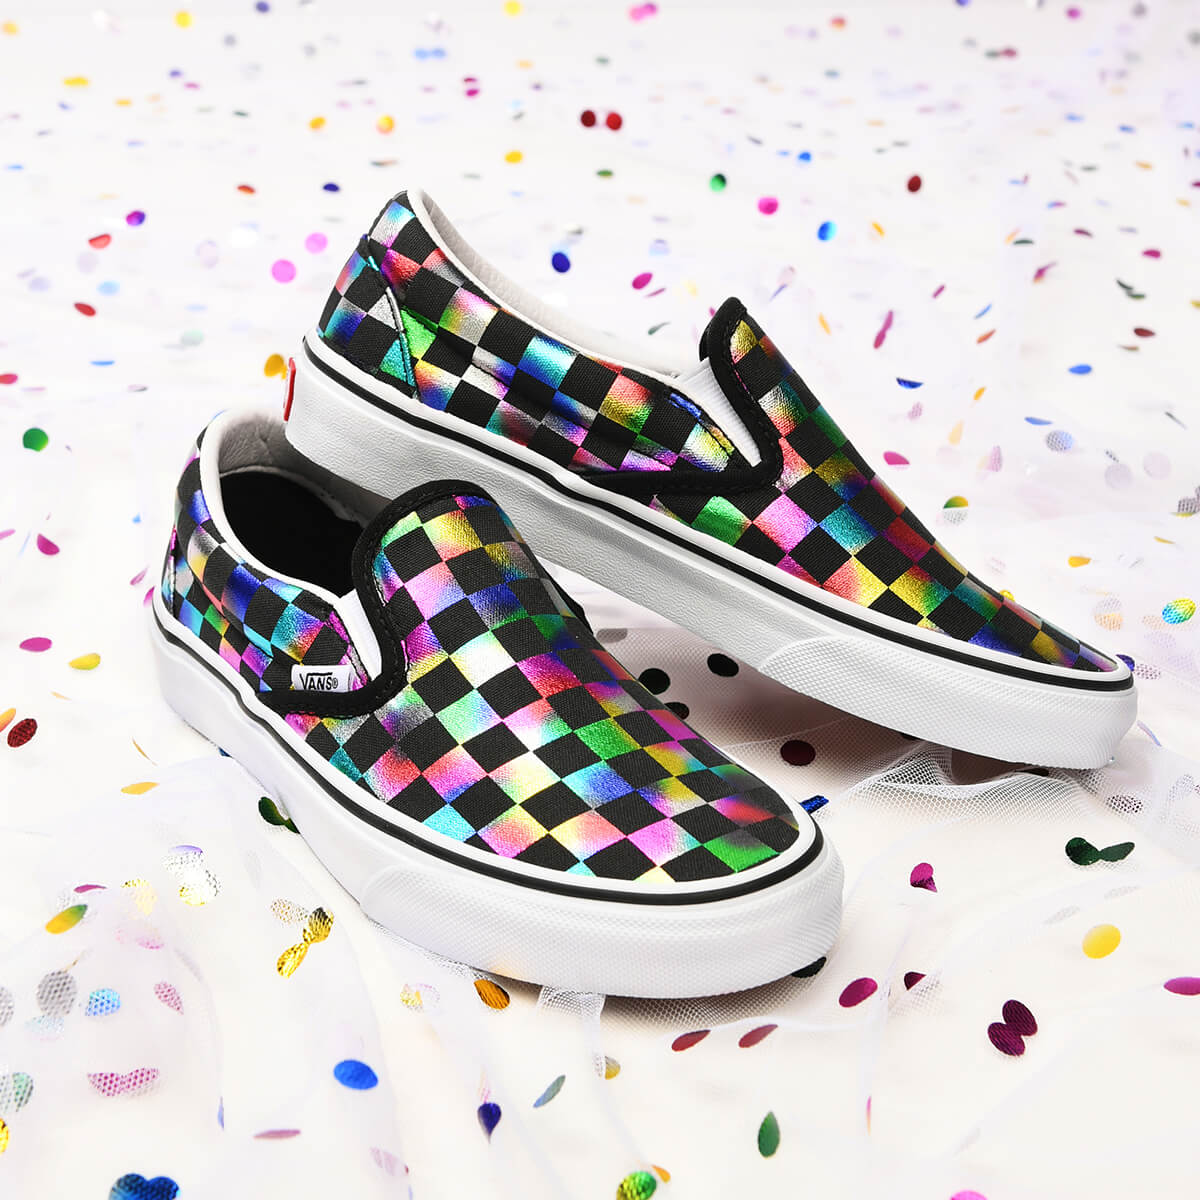 NEW VANS FOR WOMEN AND MORE FOOTWEAR - SHOP SHOES